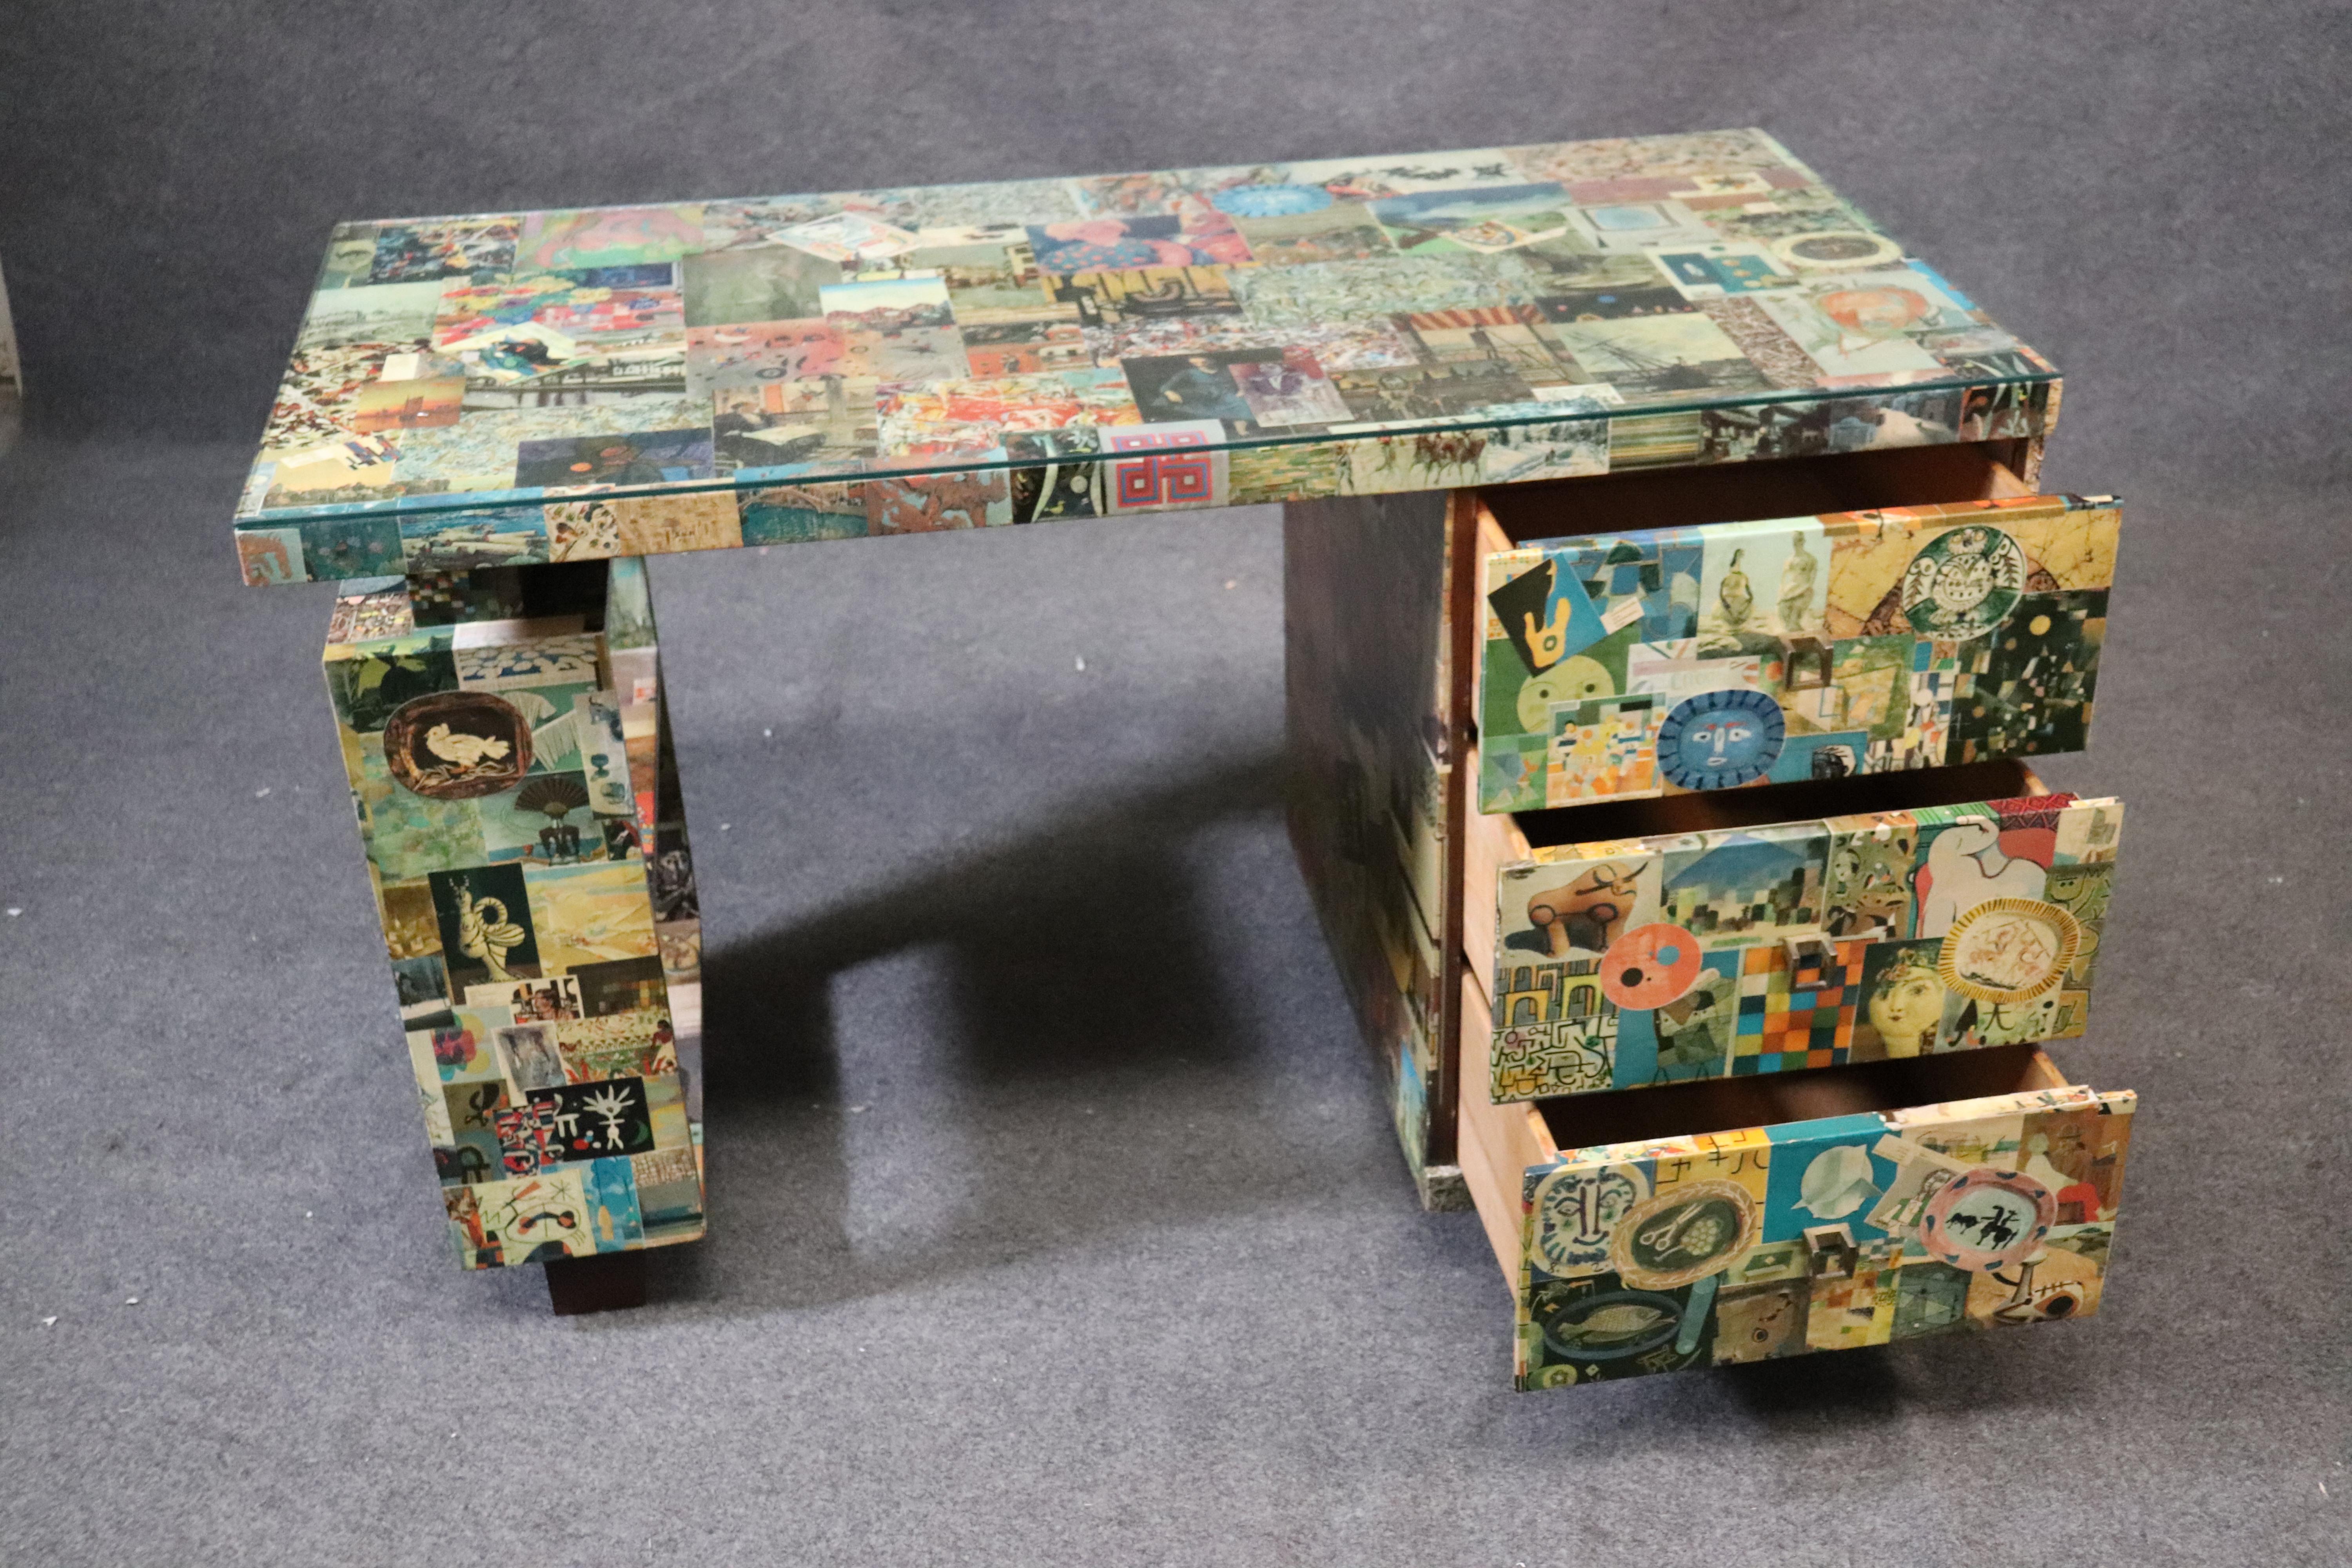 This is a unique desk, done in an unusual collage that gives it an artsy and uniquely modern look. The desk dates to the 1960s era and measures: 49 wide x 24 deep x 30 tall.